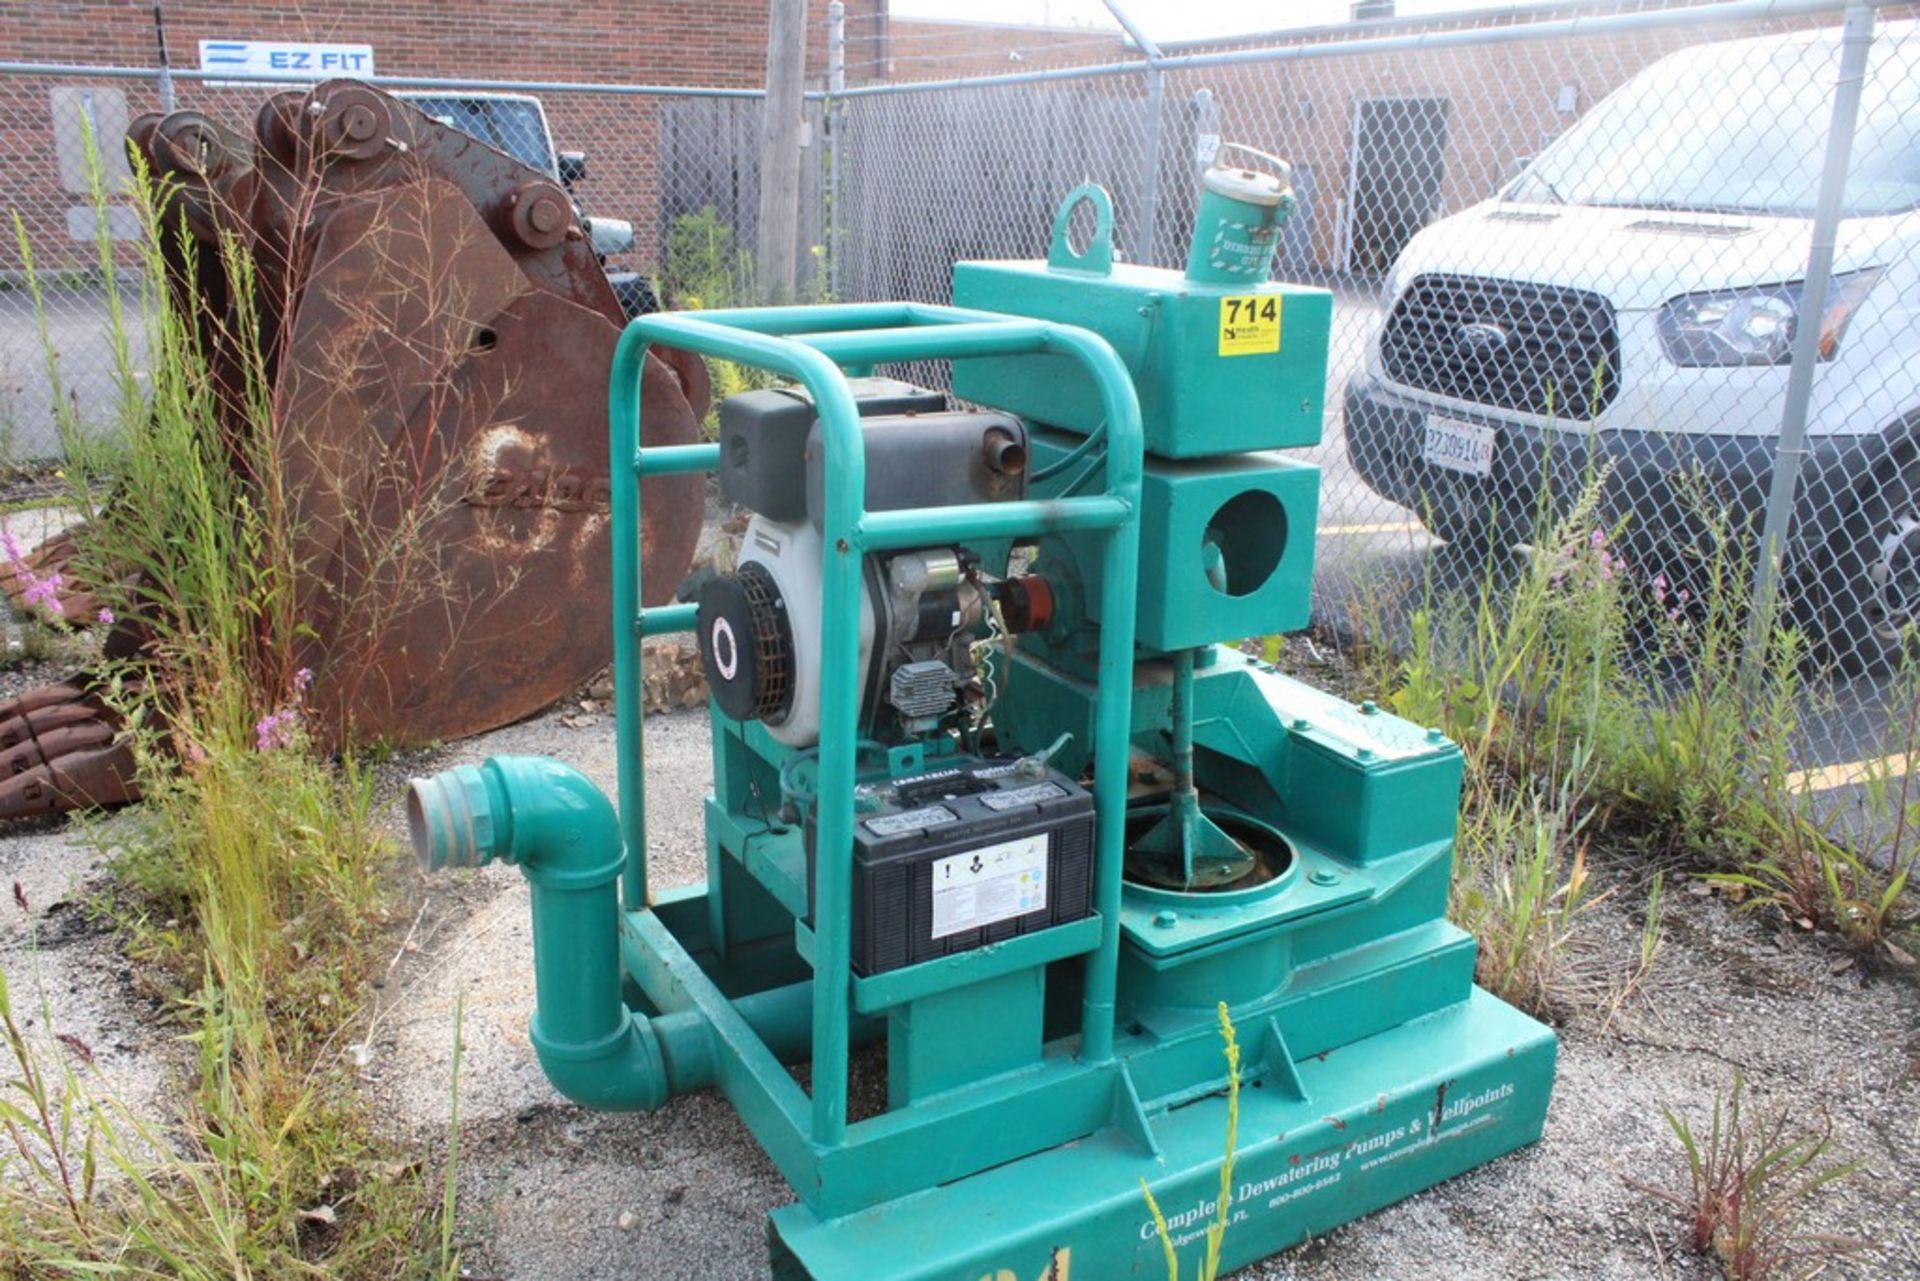 COMPLETE DEWATERING PUMPS & WELL POINTS DIESEL POWERED PUMP, 4" WITH YANMAR MODEL 100 V6-L ENGINE,